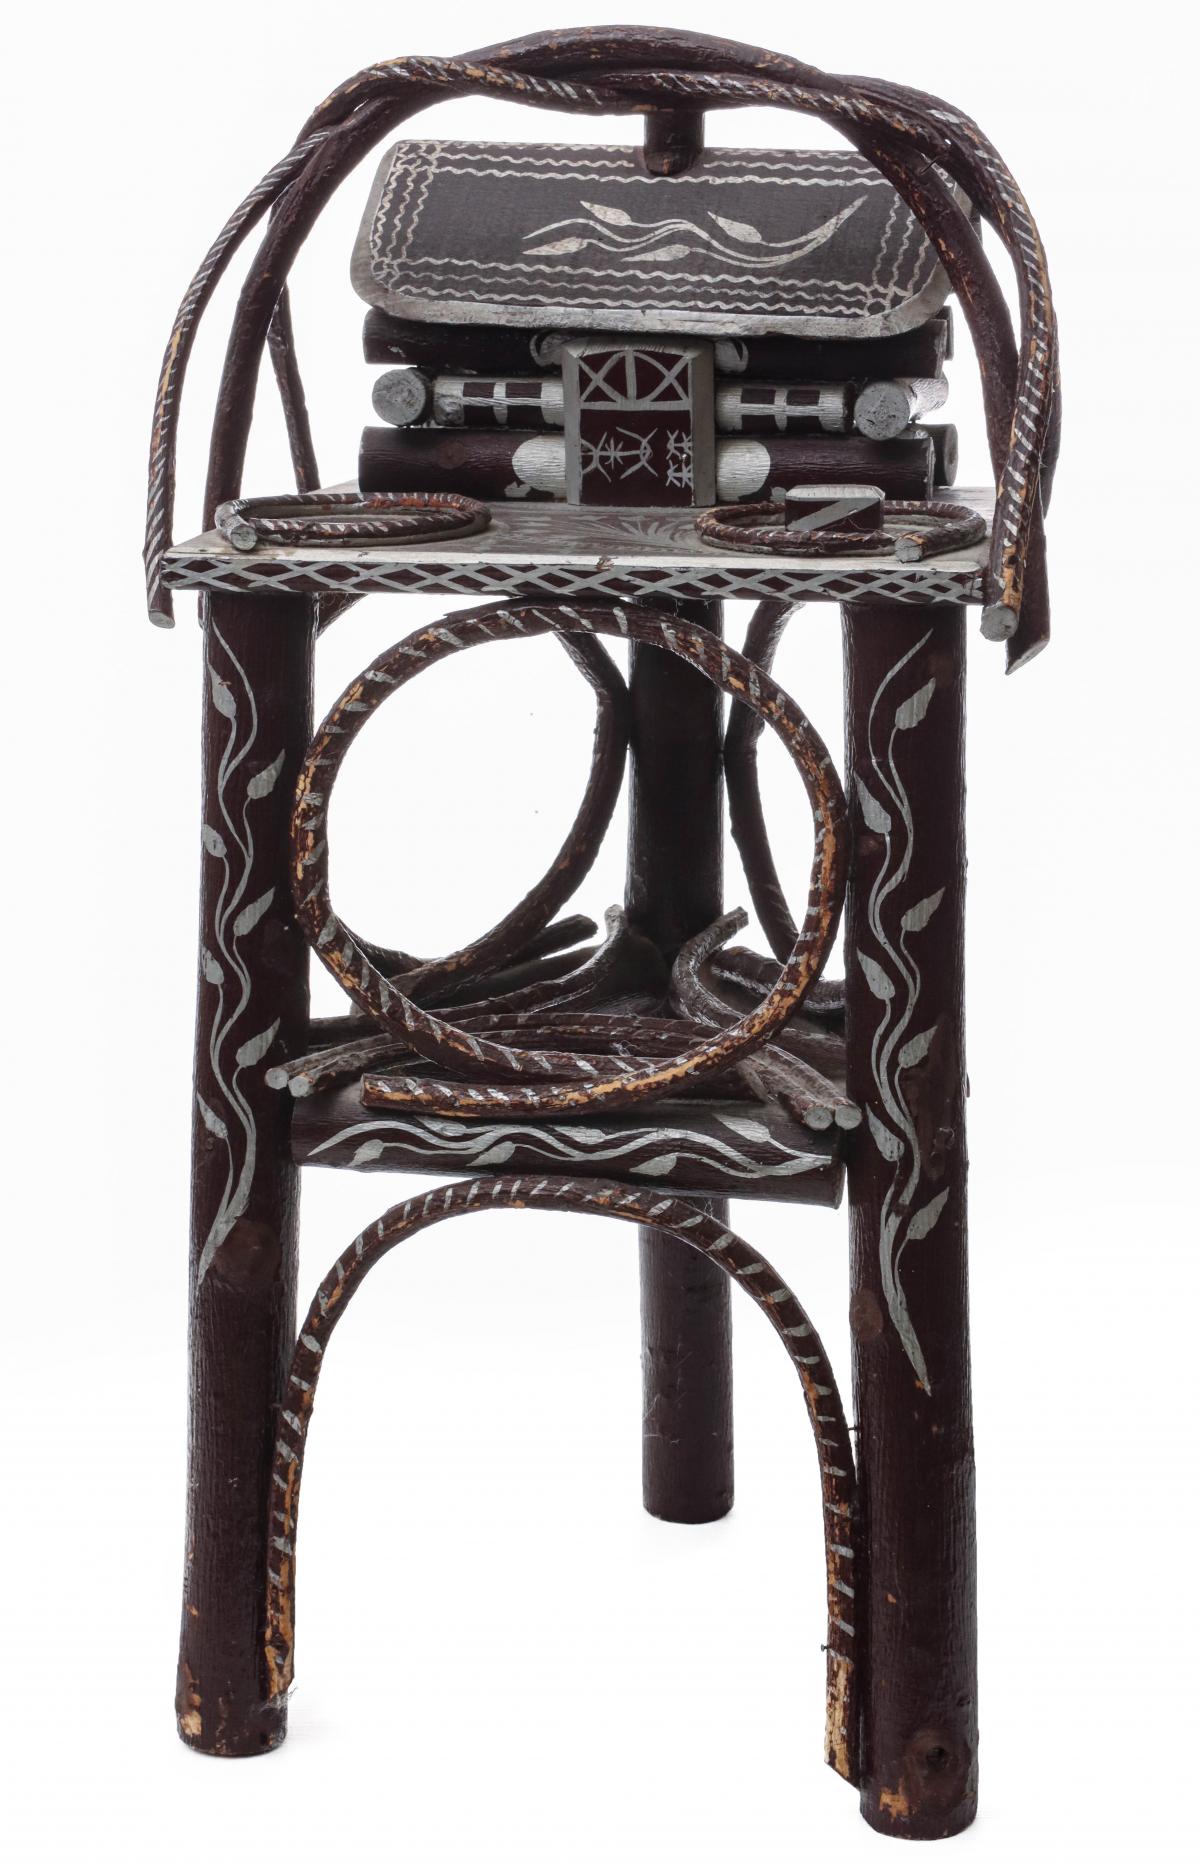 AN EARLY 20TH C DECORATED TWIG ART STAND WITH LOG CABIN